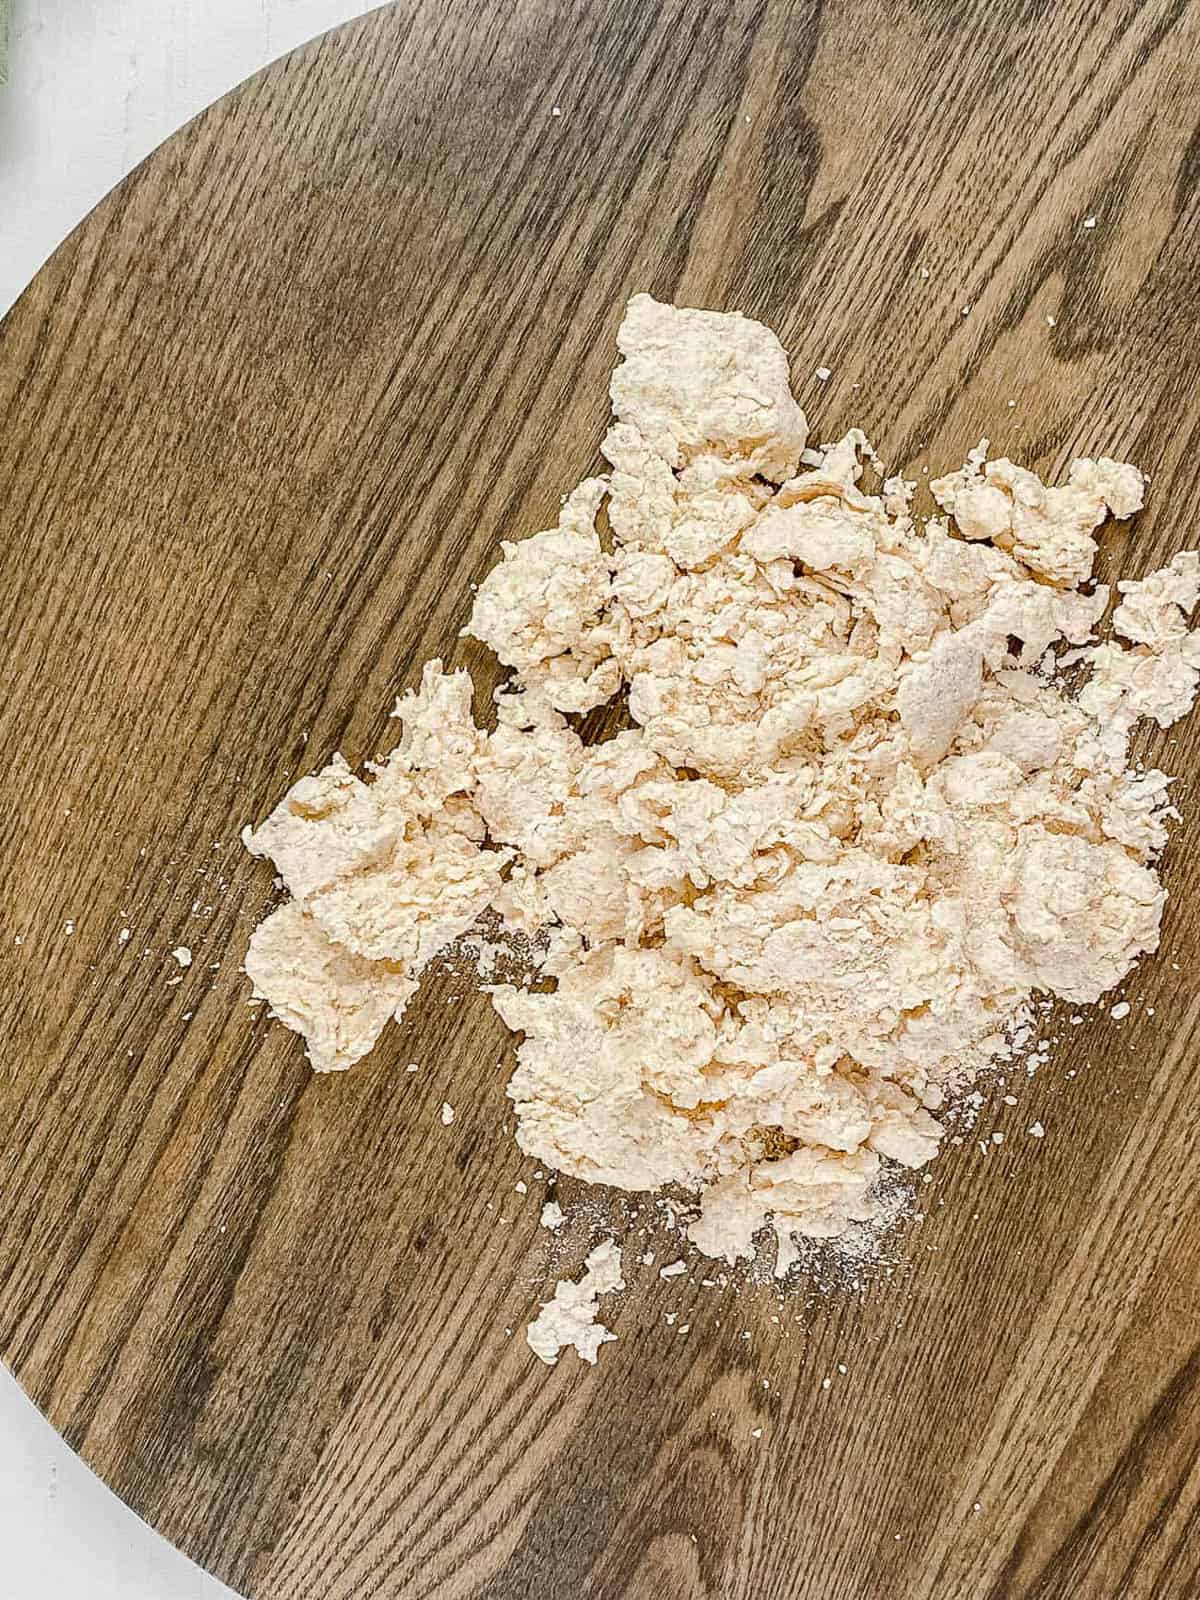 The low calorie pizza dough on a wooden cutting board before kneading.